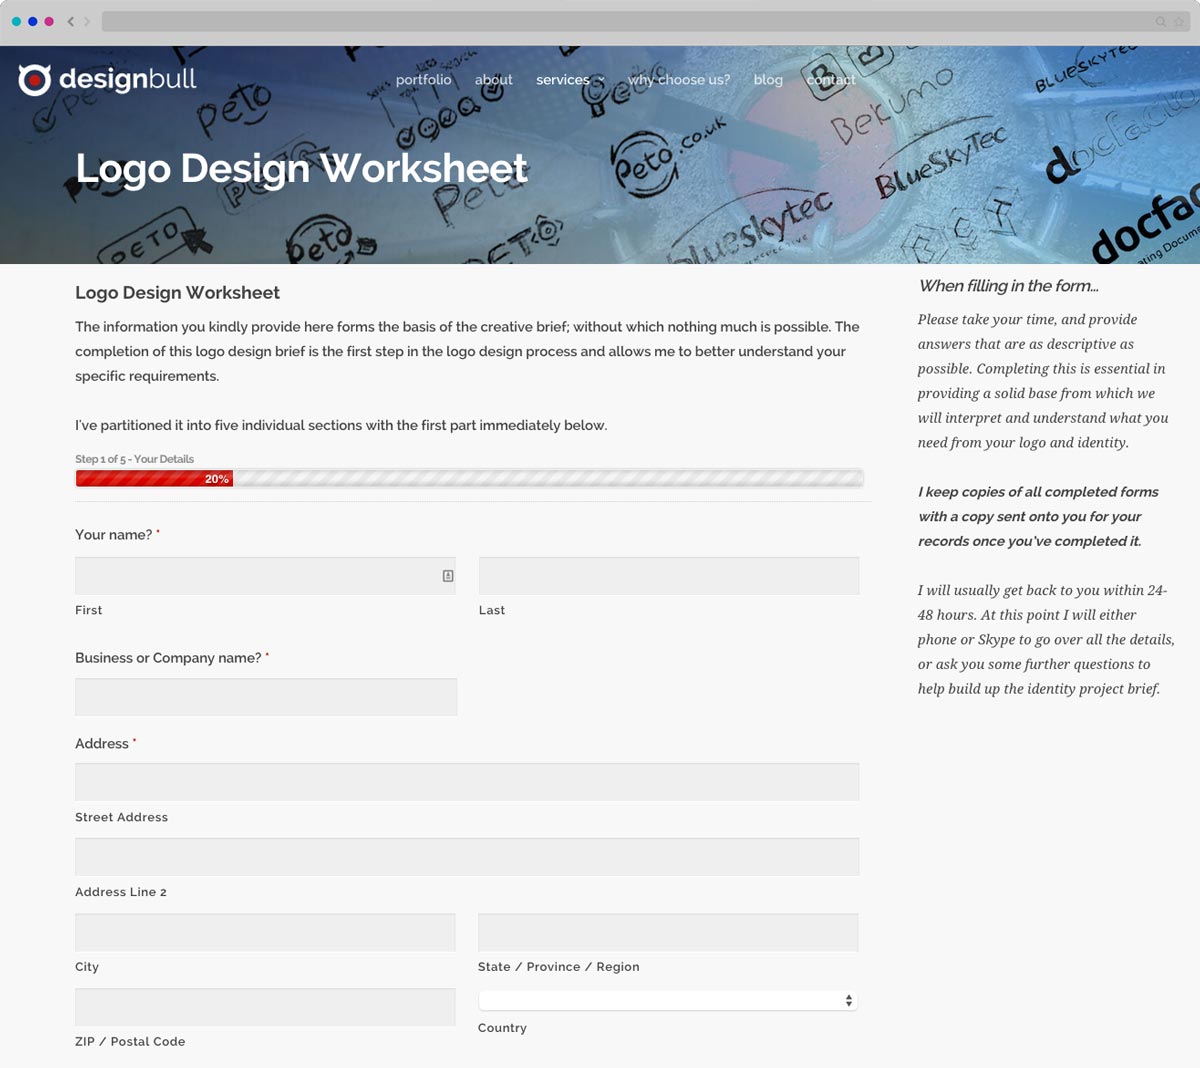 Ask client to fill out Logo Design Worksheet